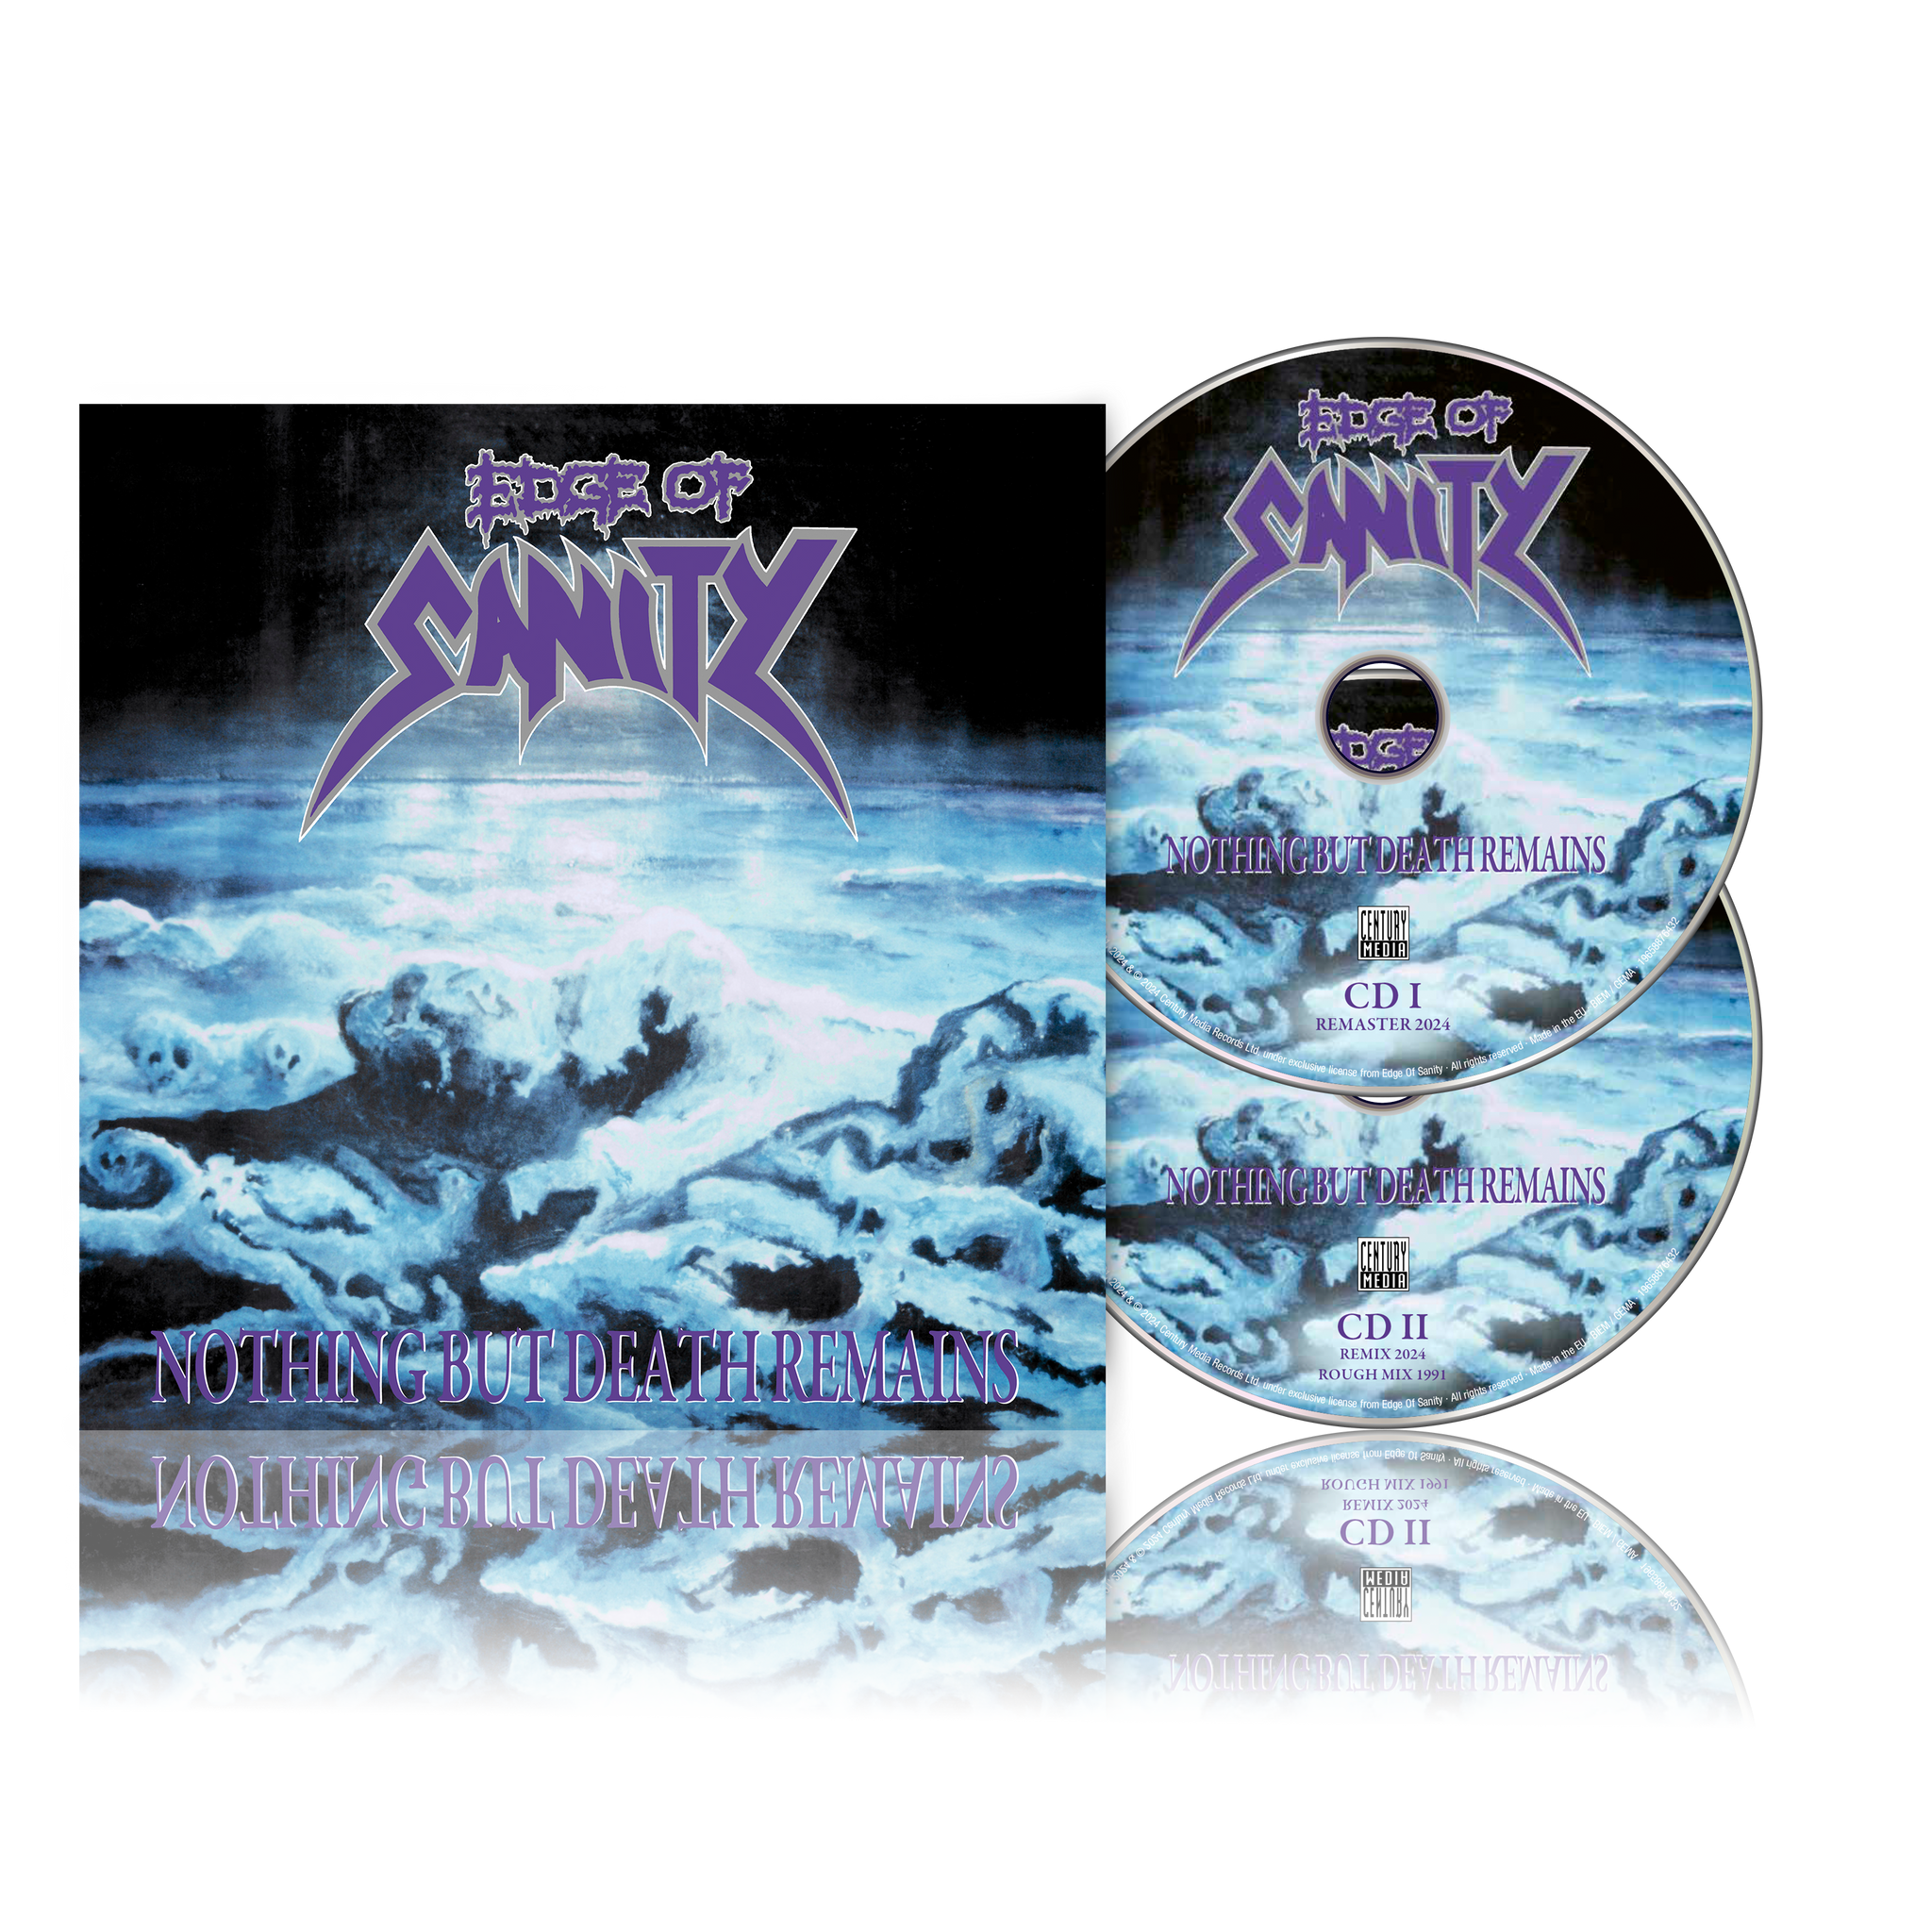 Edge of Sanity - Nothing But Death Remains (Re-issue) - 2xCD